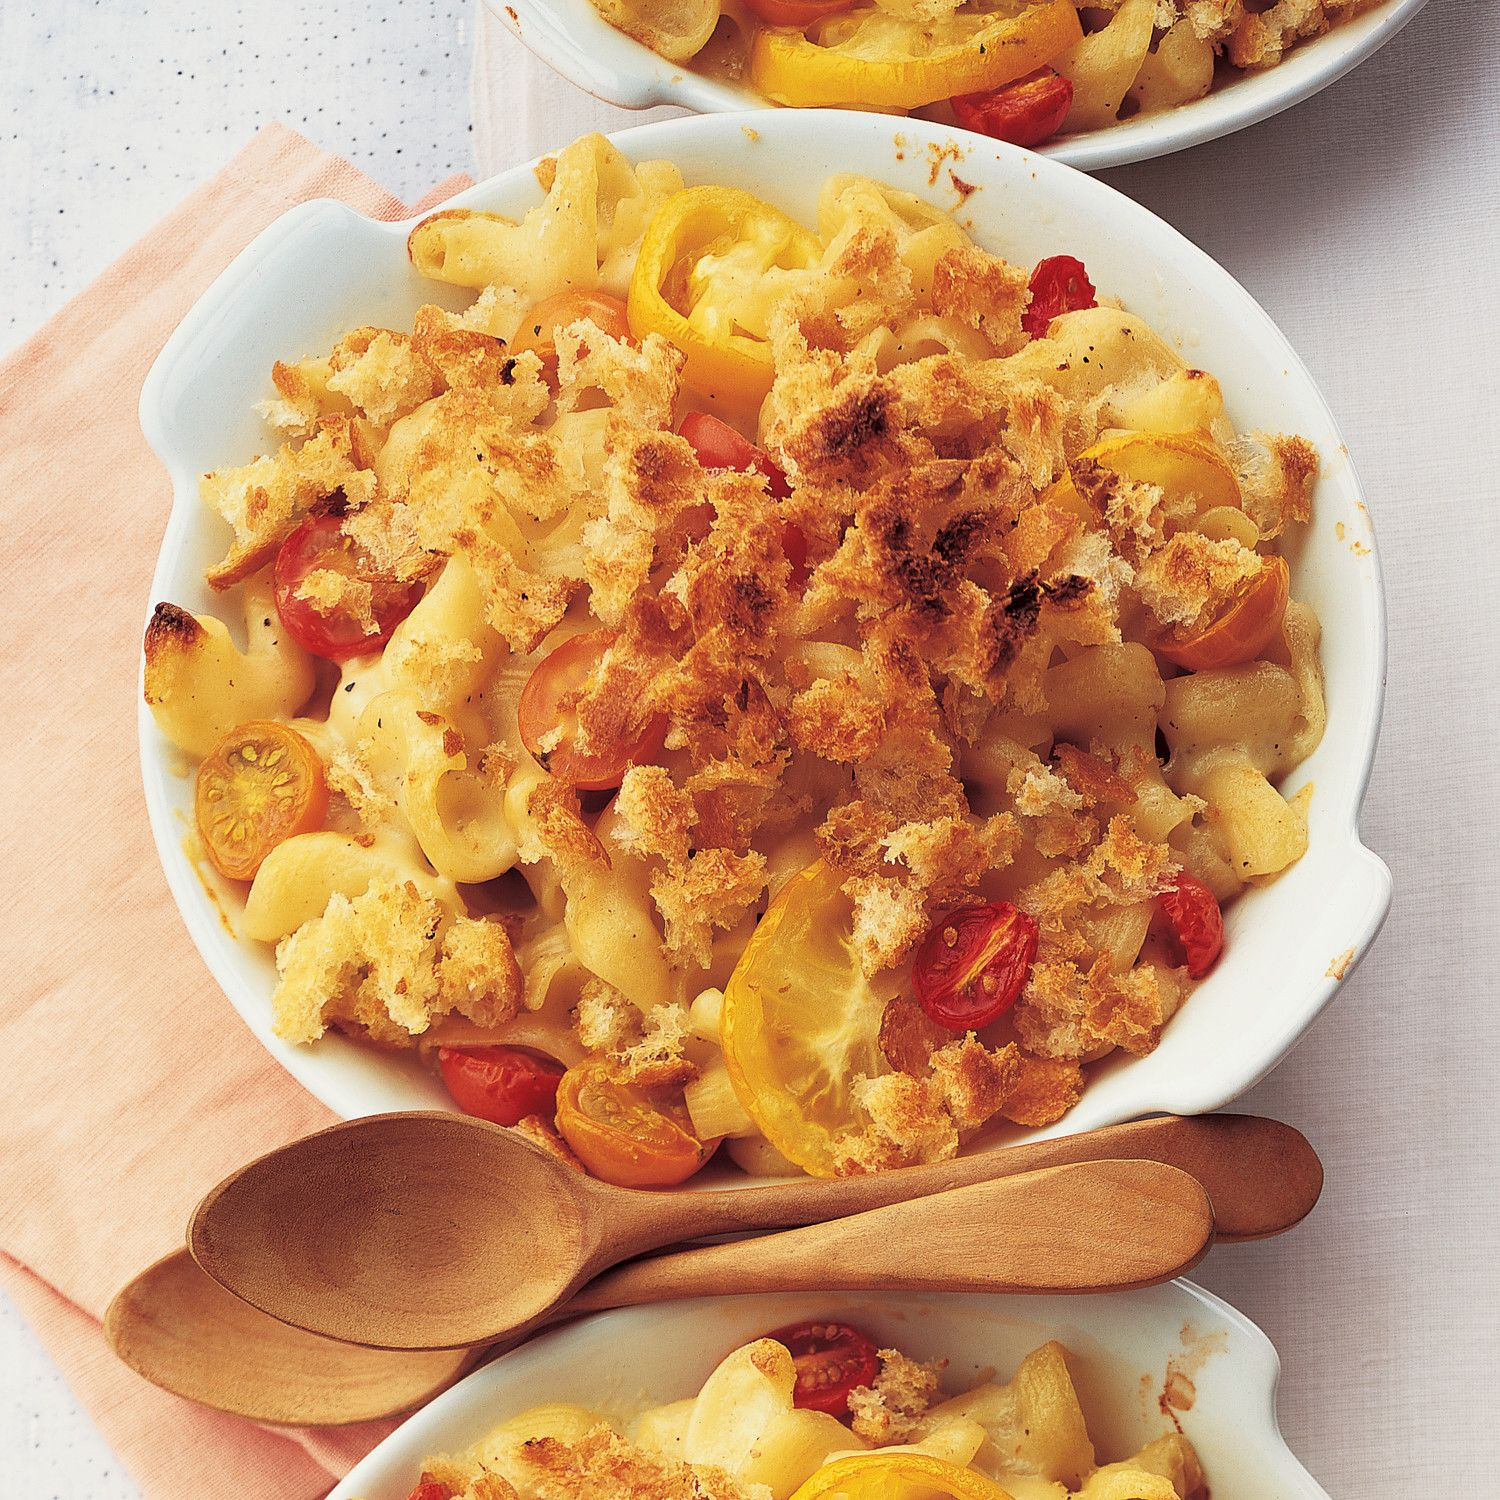 Baked Macaroni And Cheese With Tomatoes And Breadcrumbs
 Baked Mac and Cheese with Broiled Tomatoes